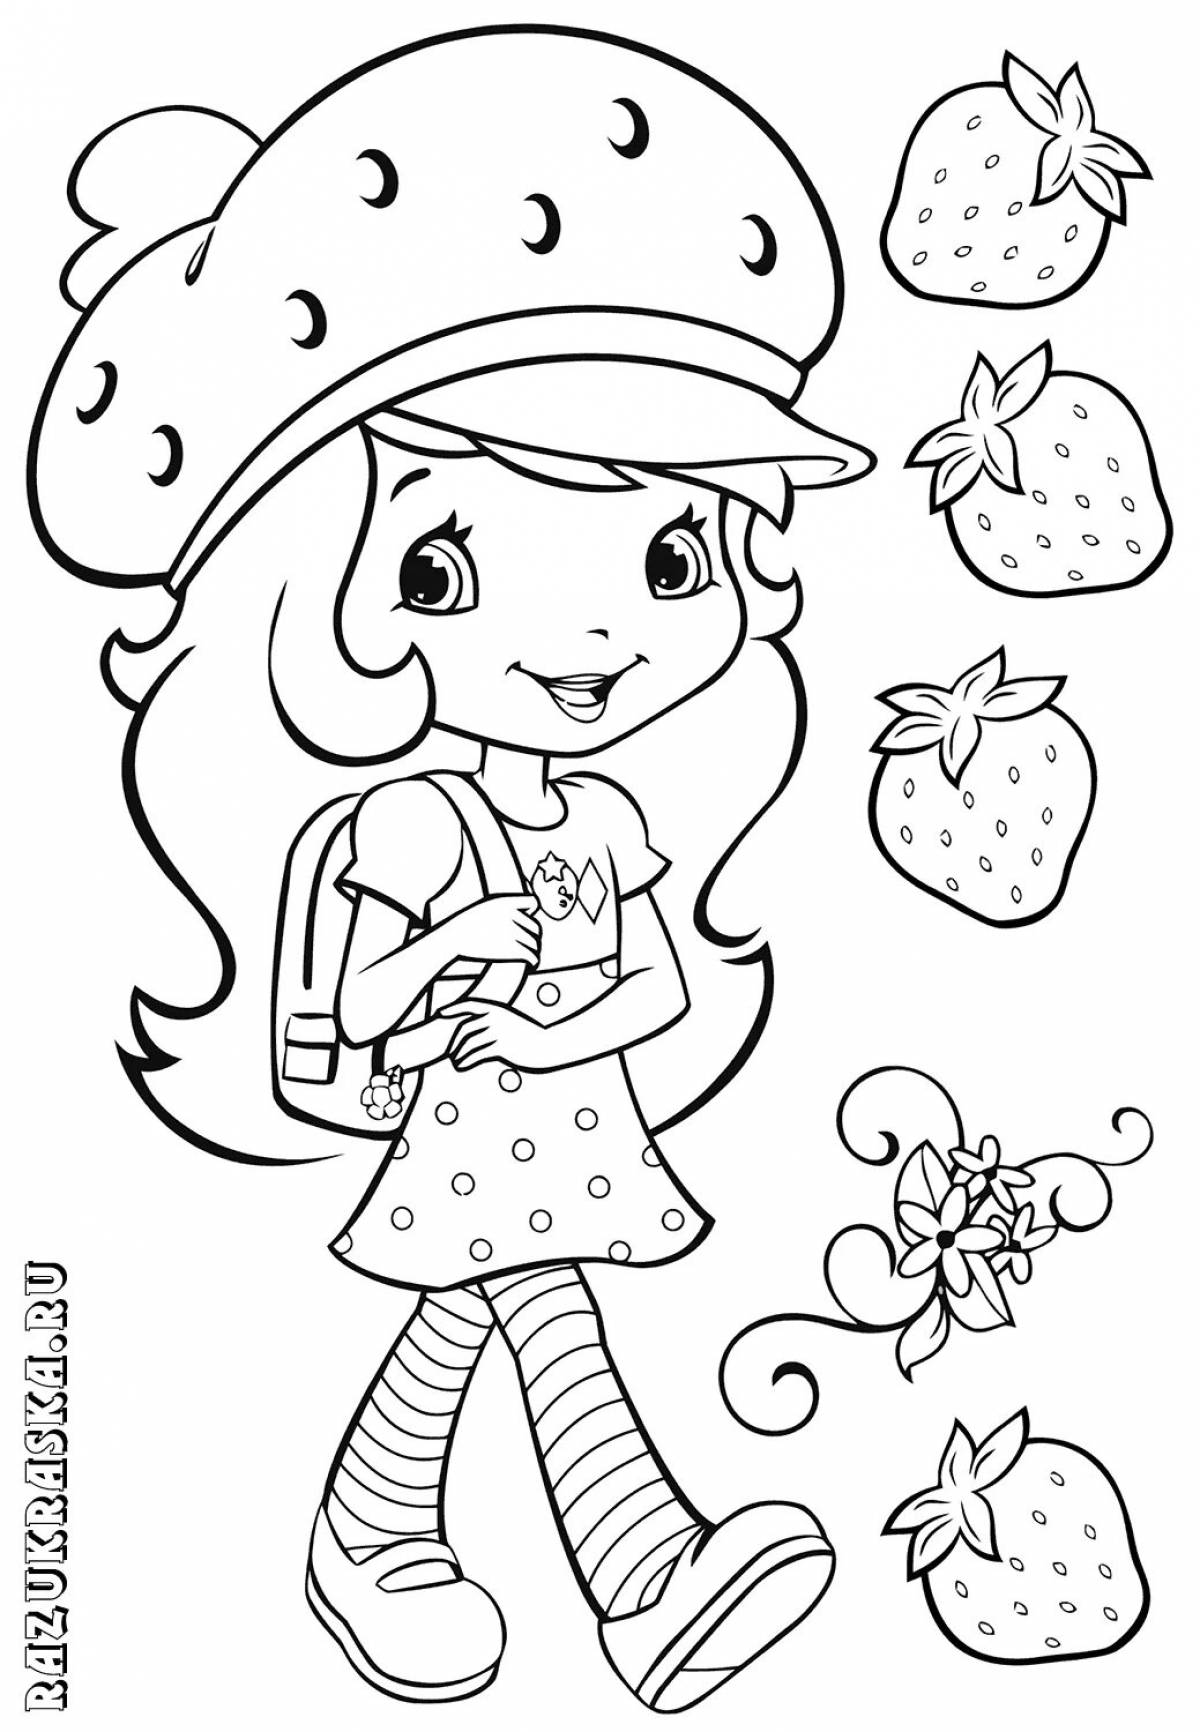 Colorful Innocence Berries coloring book for girls